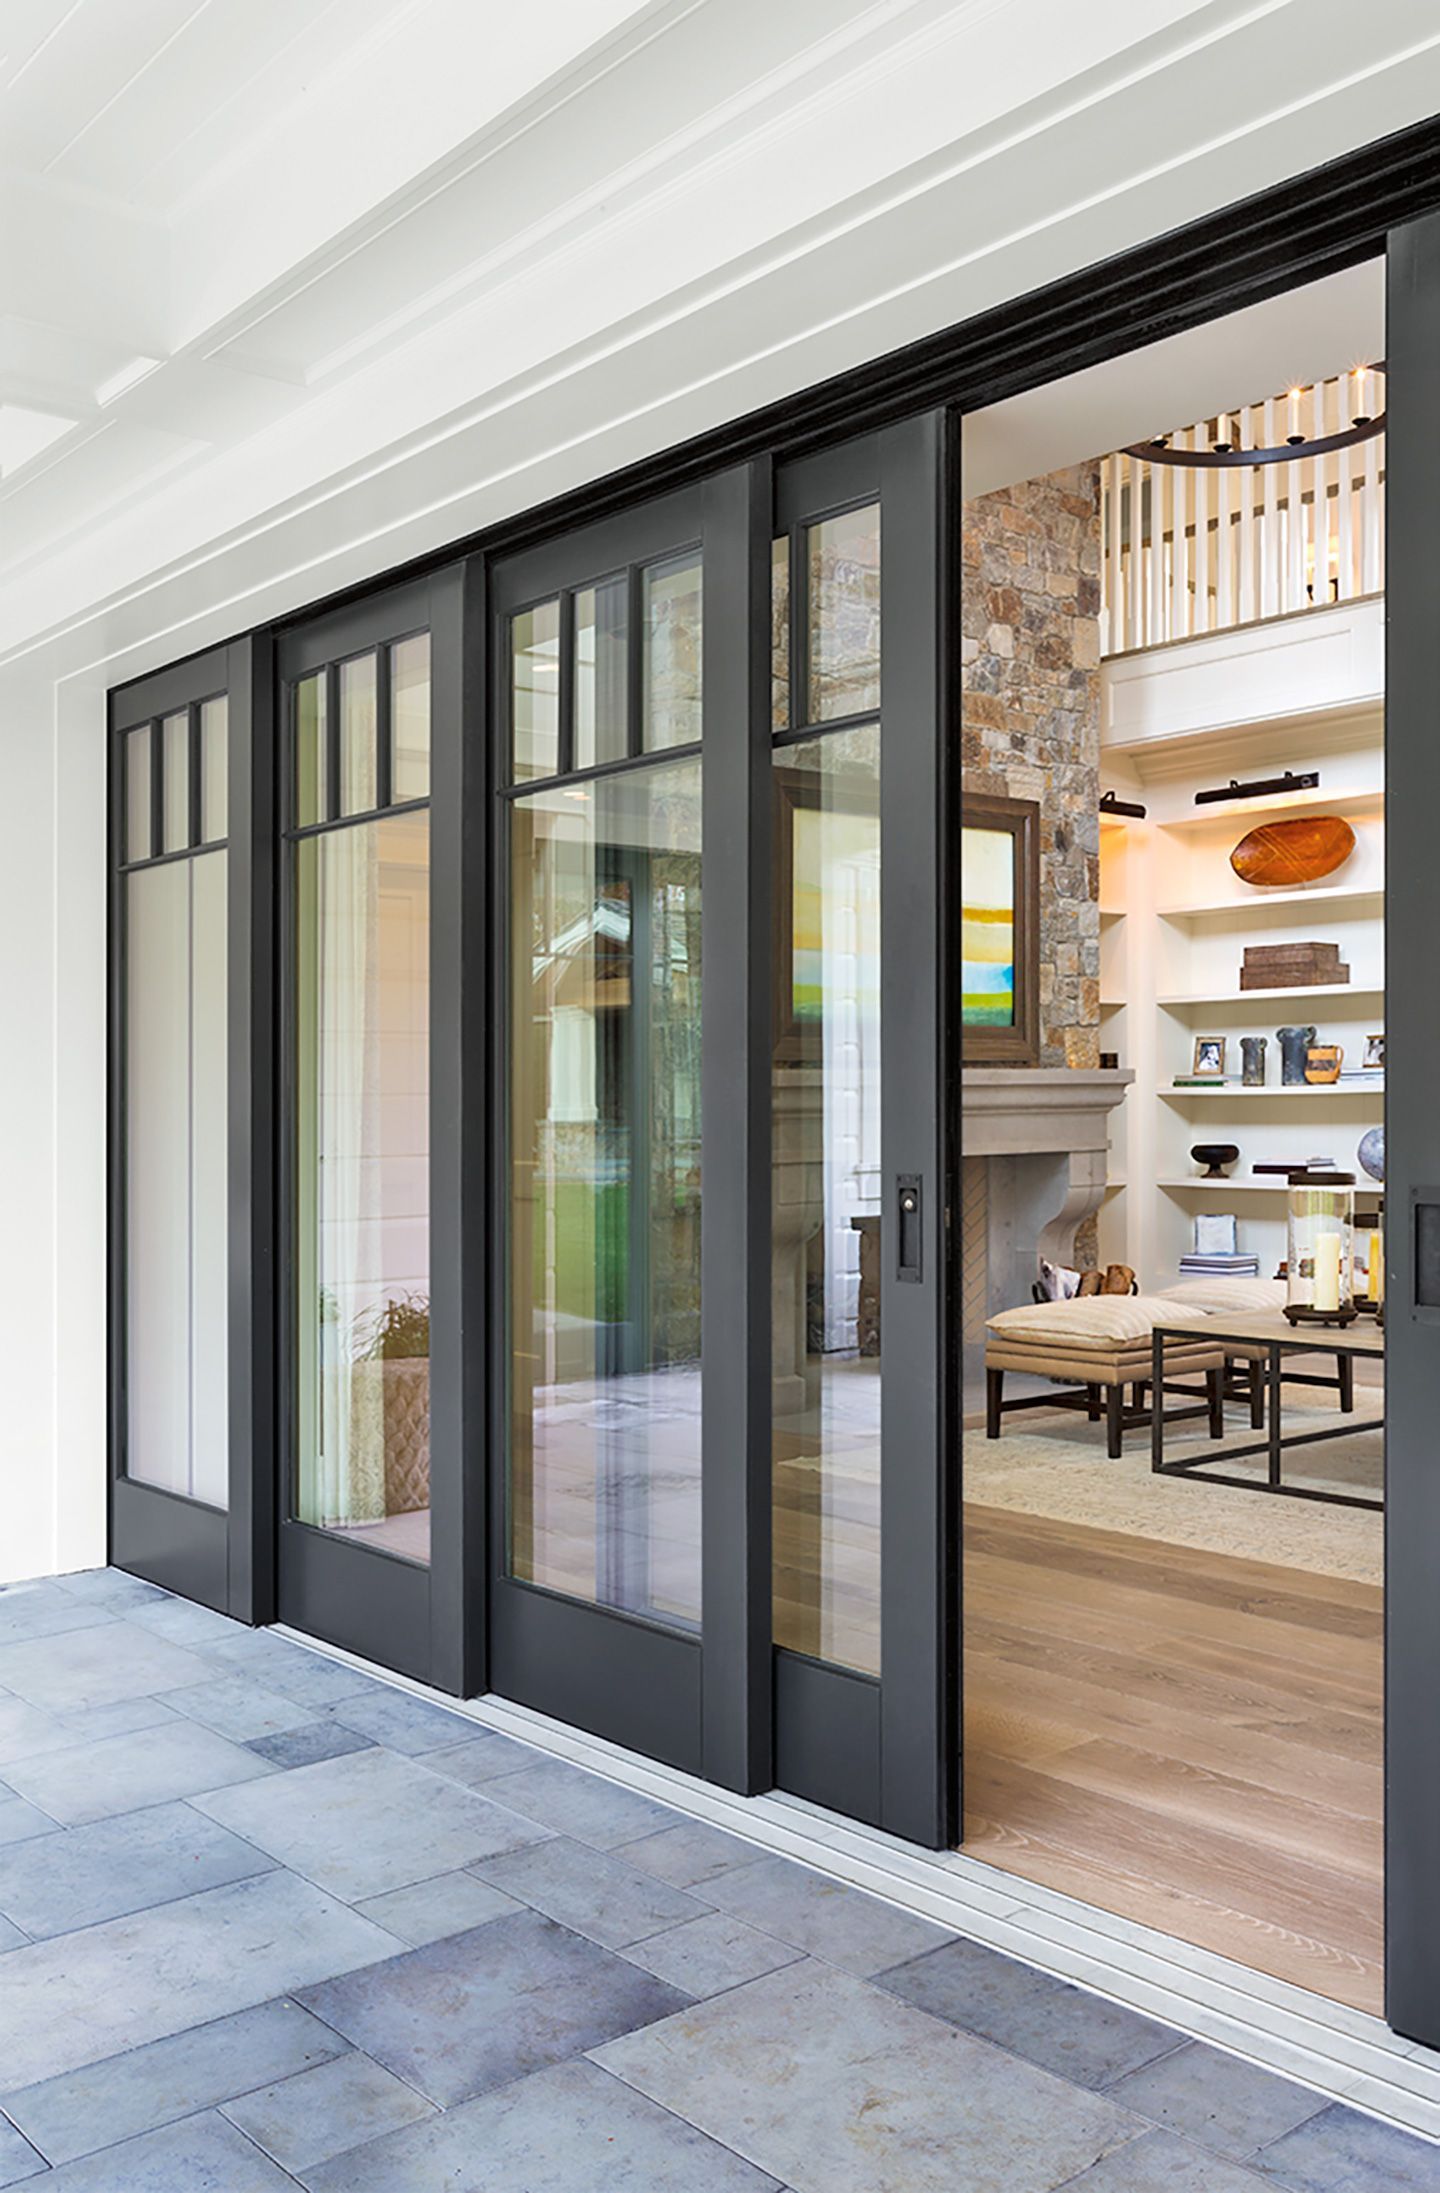 What You Need To Know Before Selecting A New Patio Door For Your Home